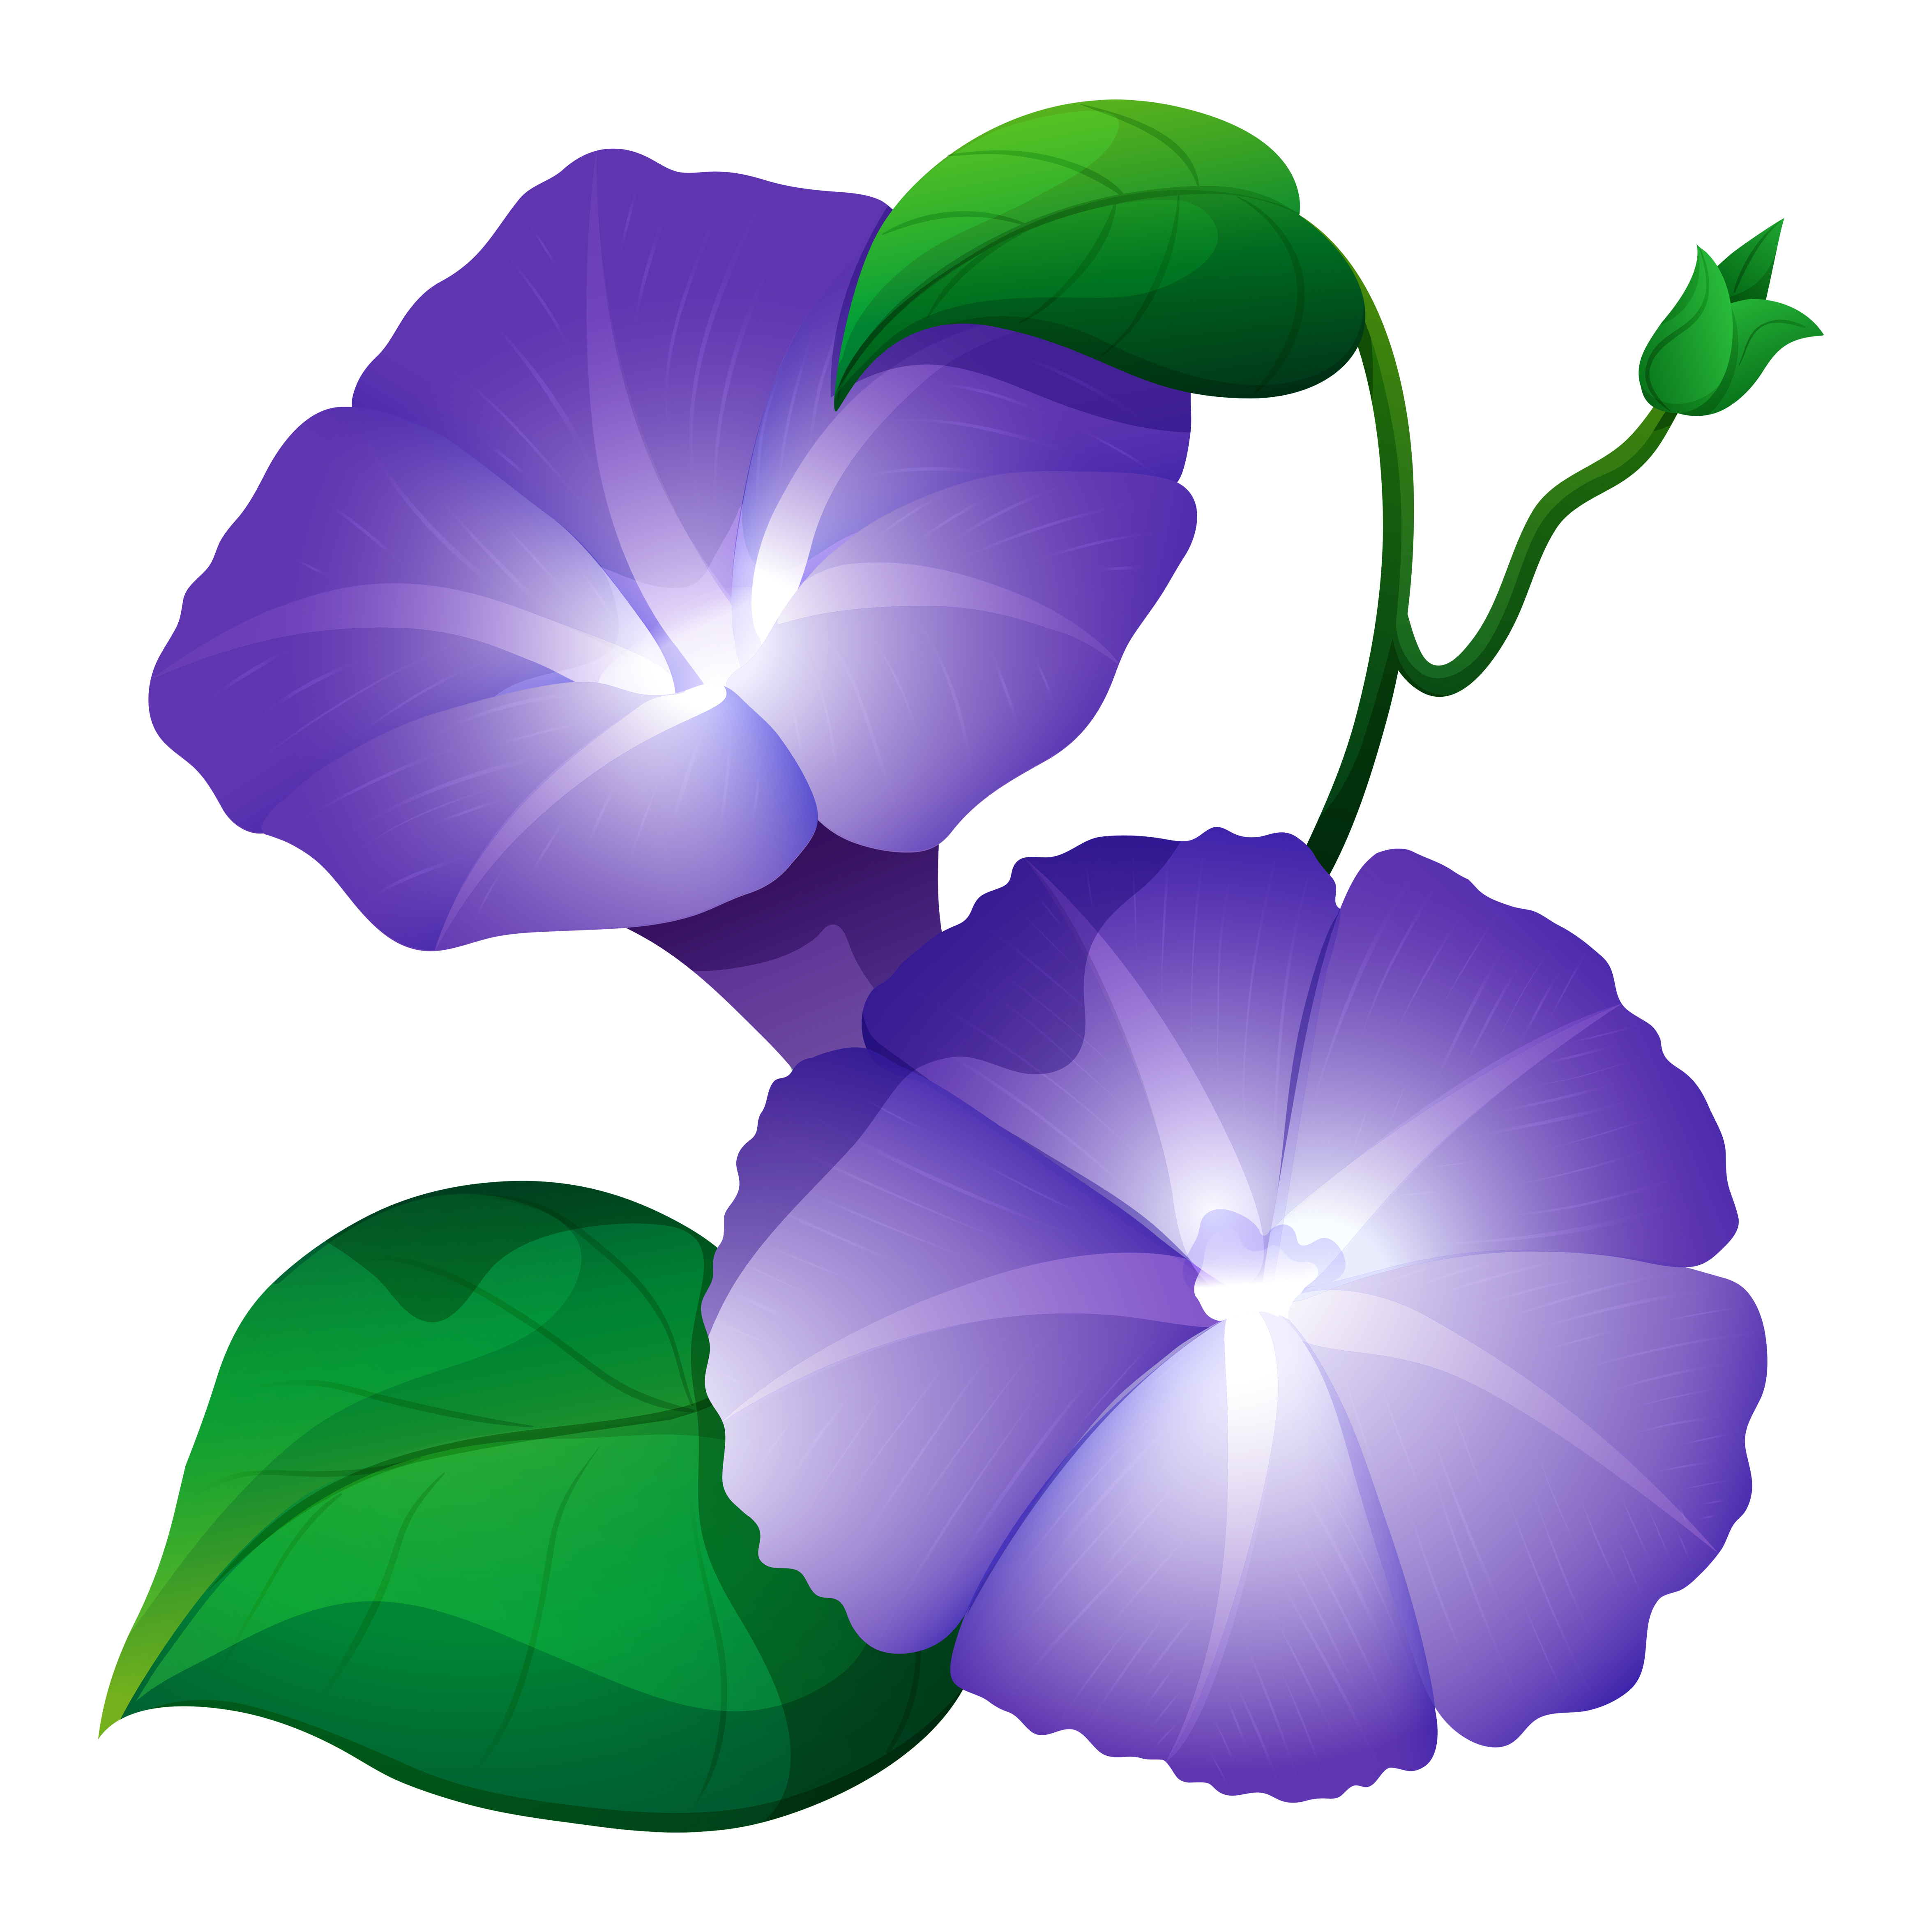 Download Morning Glory Free Vector Art - (21,137 Free Downloads)